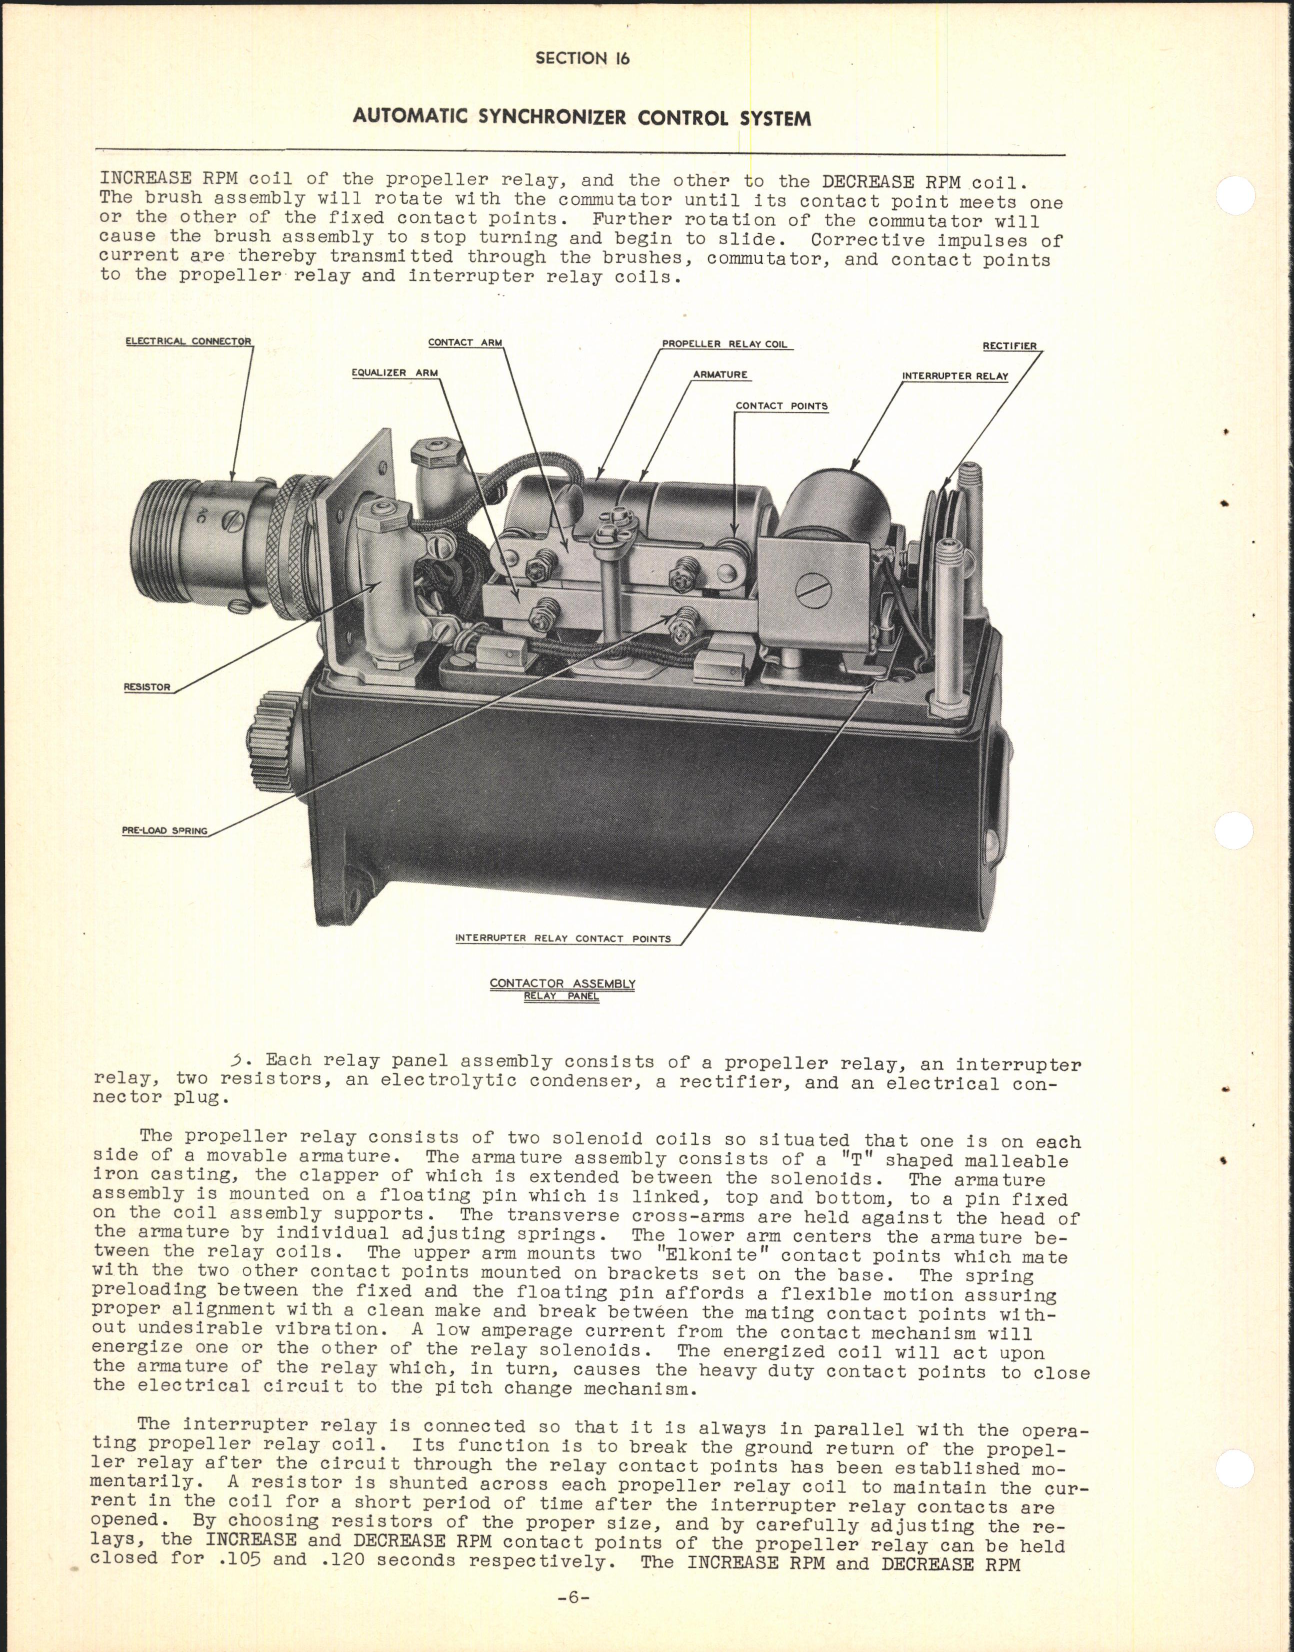 Sample page 8 from AirCorps Library document: Section 16 - Automatic Synchronizer Control System